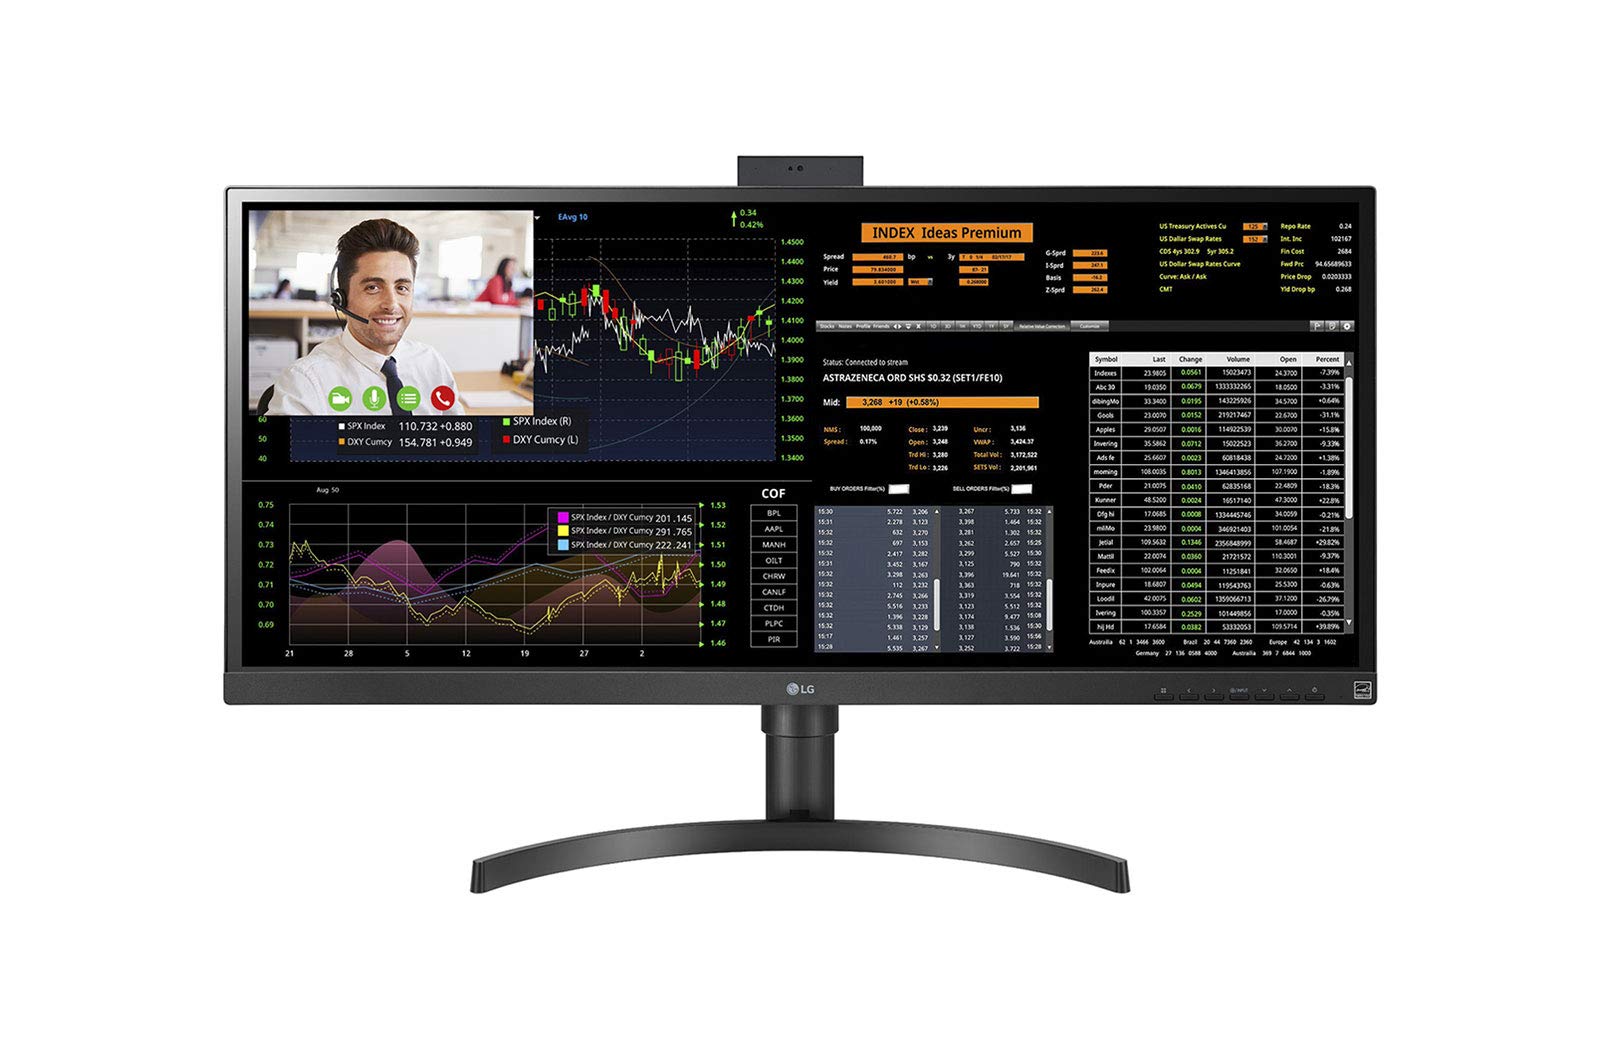 LG 34” 34CN650N-6A UltraWide FHD All-in-One Thin Client (2560 x 1080) with IPS Display, Quad-core Intel Celeron J4105 Processor, USB Type-C